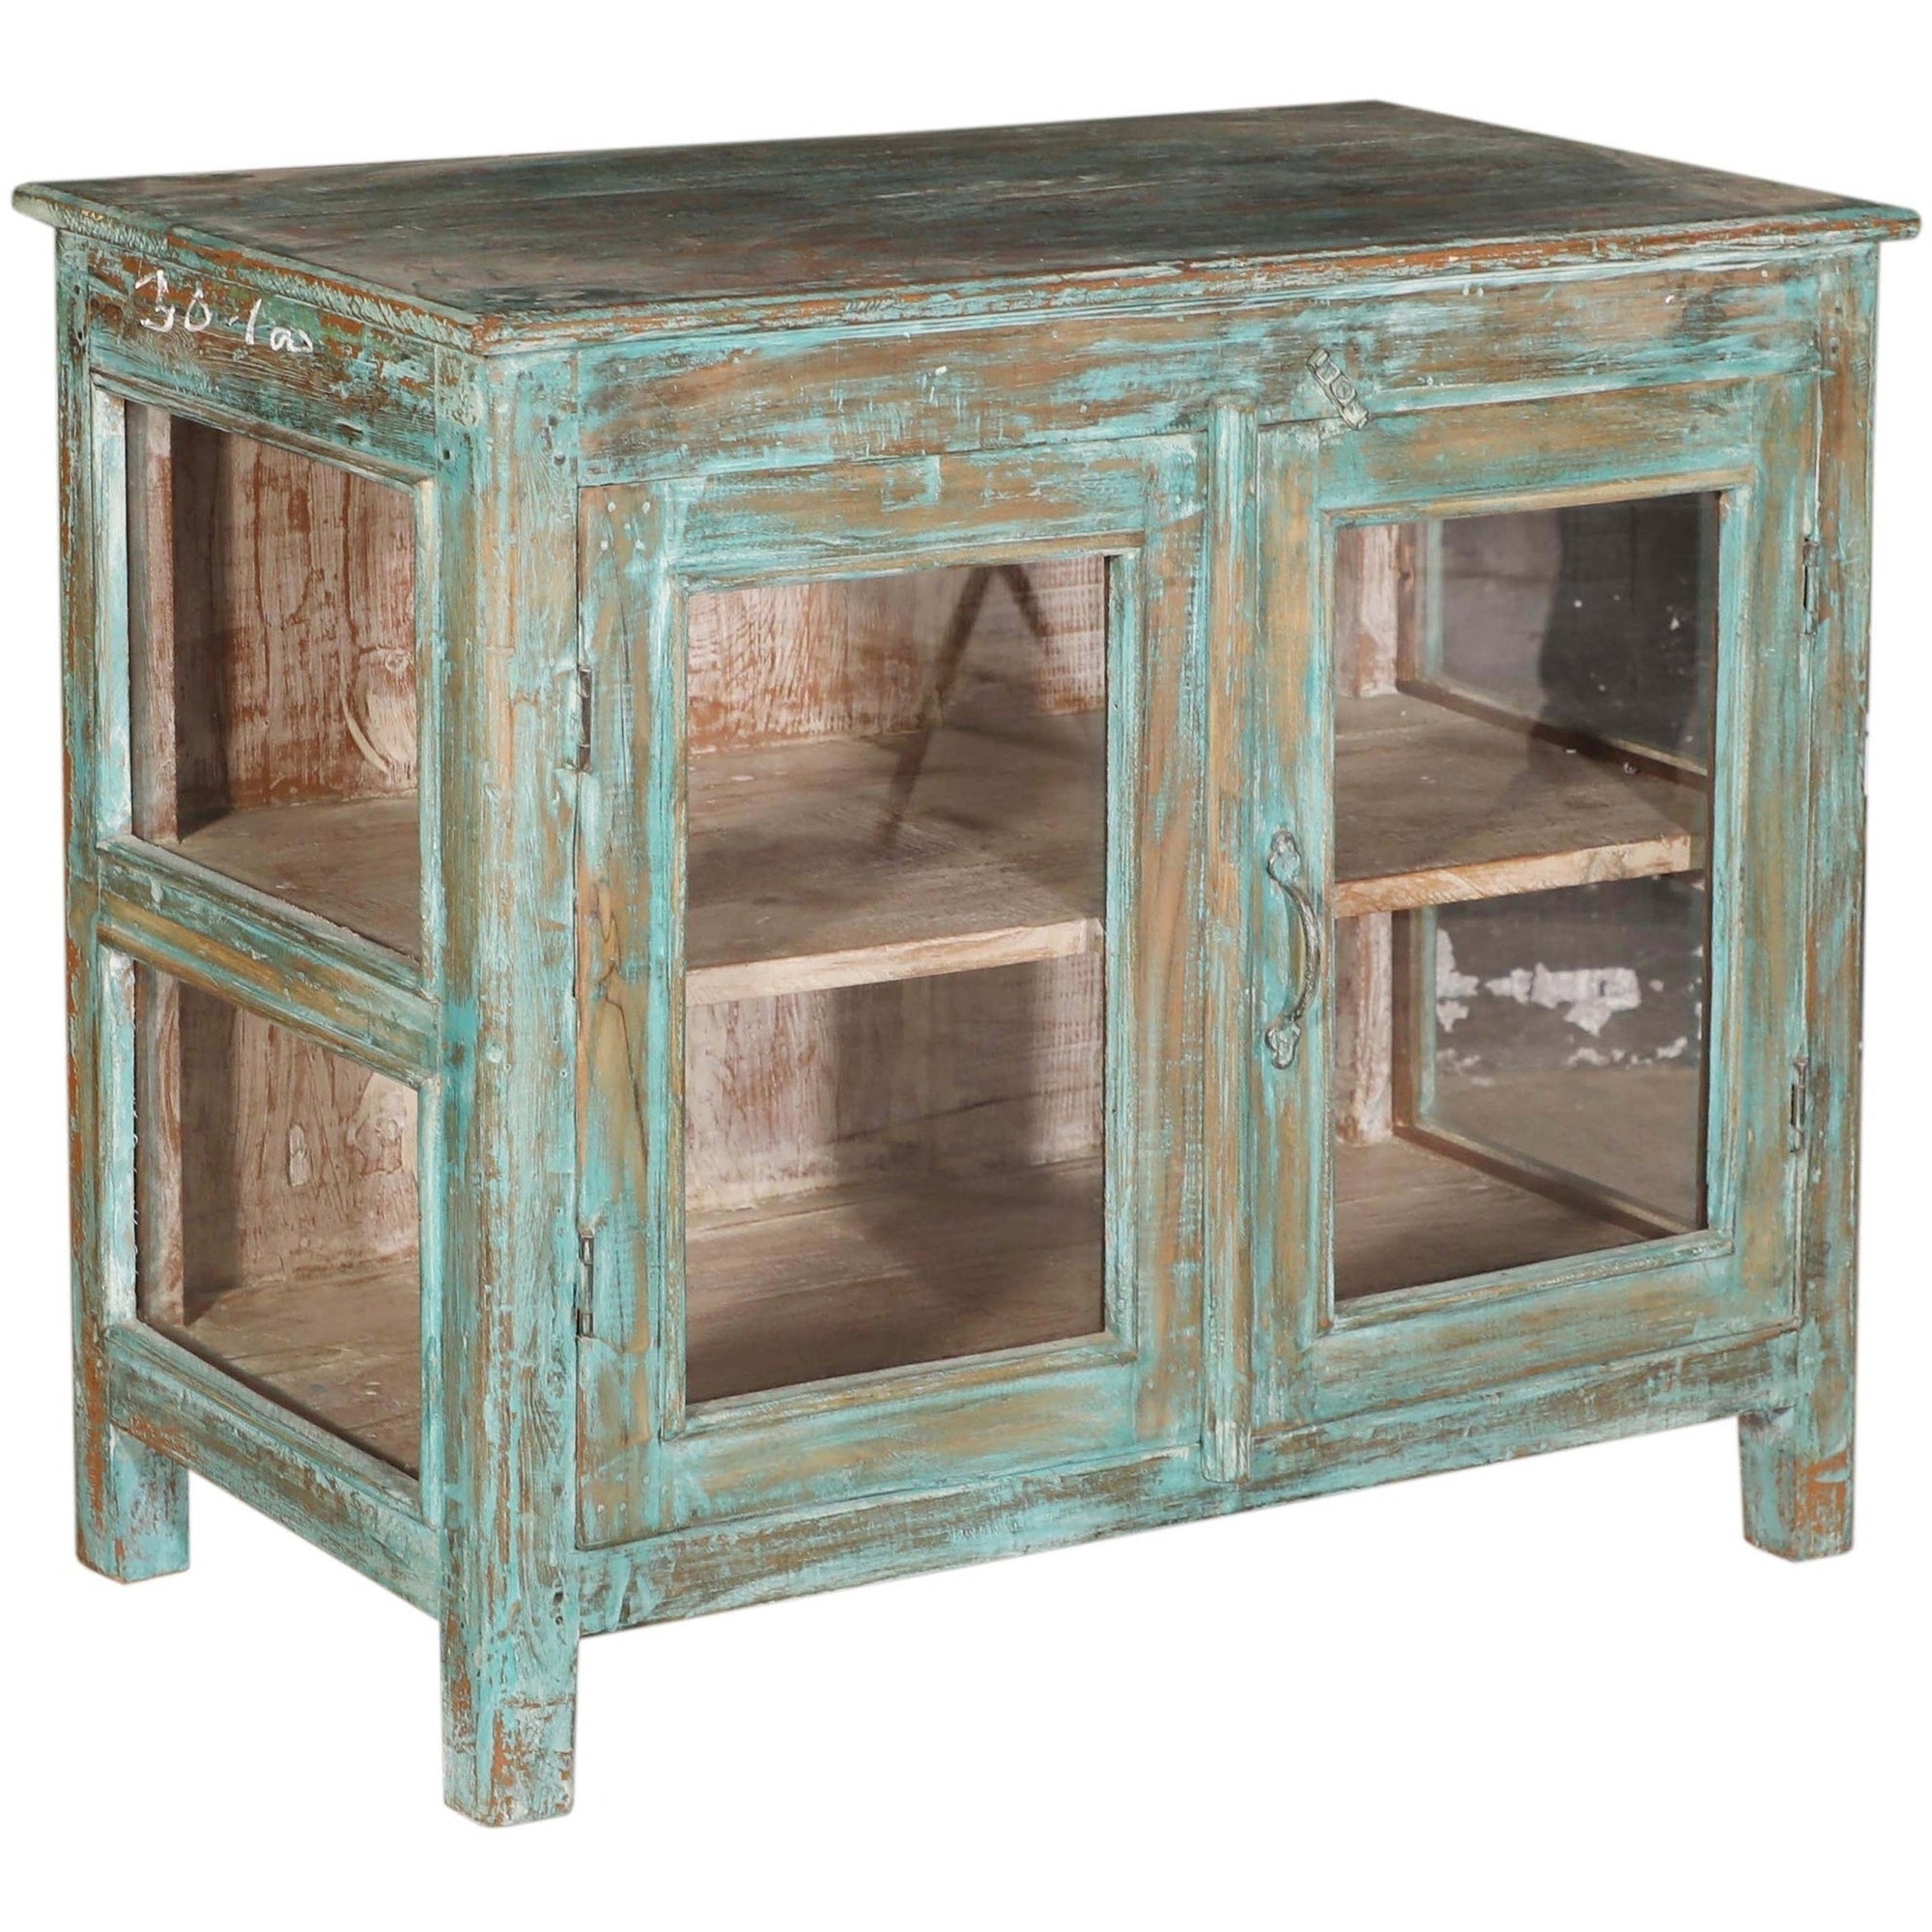 RM-060742, Wooden Cabinet With Glass, Teak, 50+Yrs Old - iDekor8